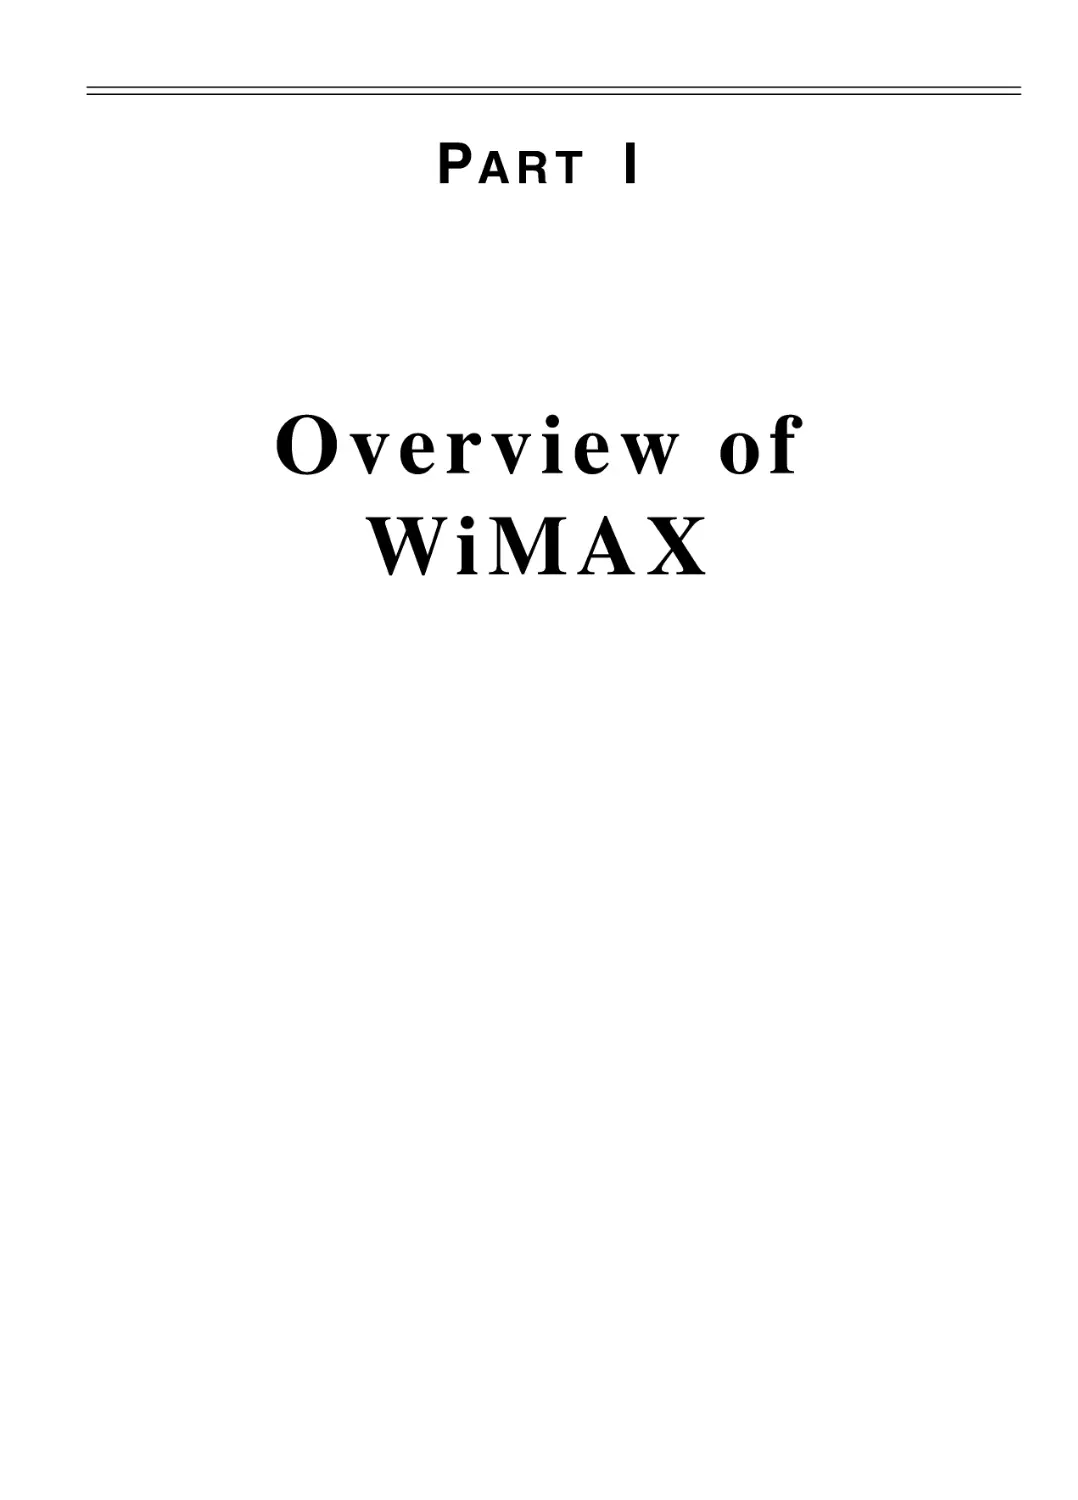 Overview of WiMAX